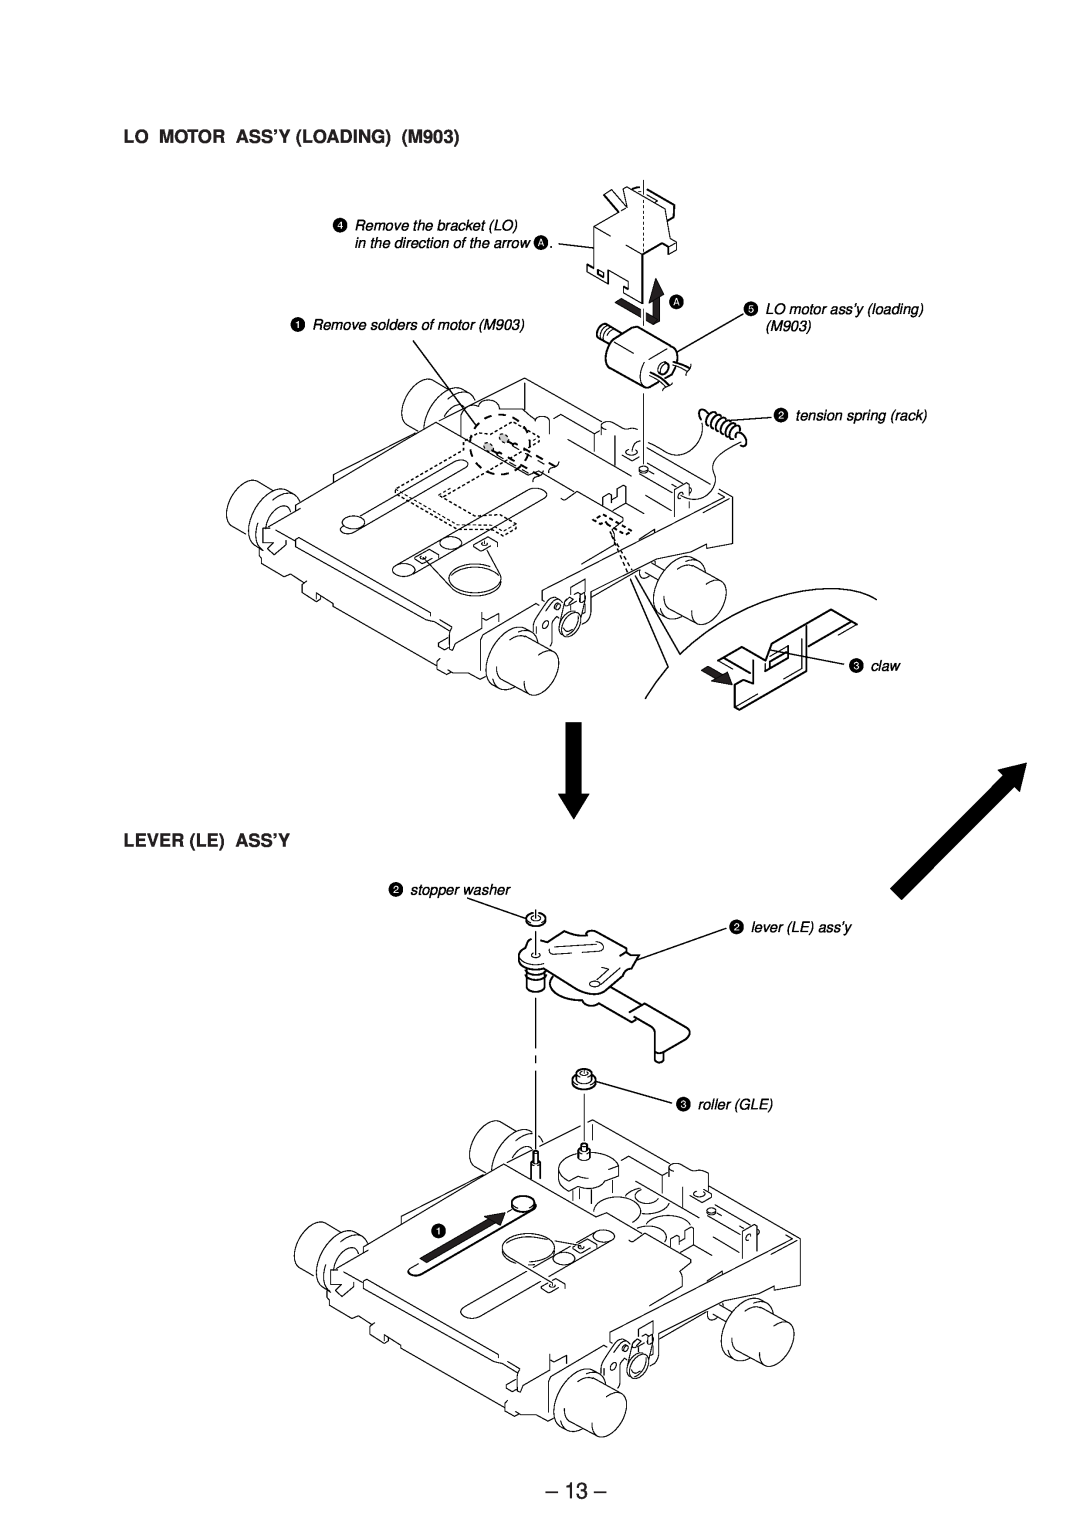 Sony MDX-C5970R service manual 13, LO MOTOR ASS’Y LOADING M903, Lever Le Ass’Y 